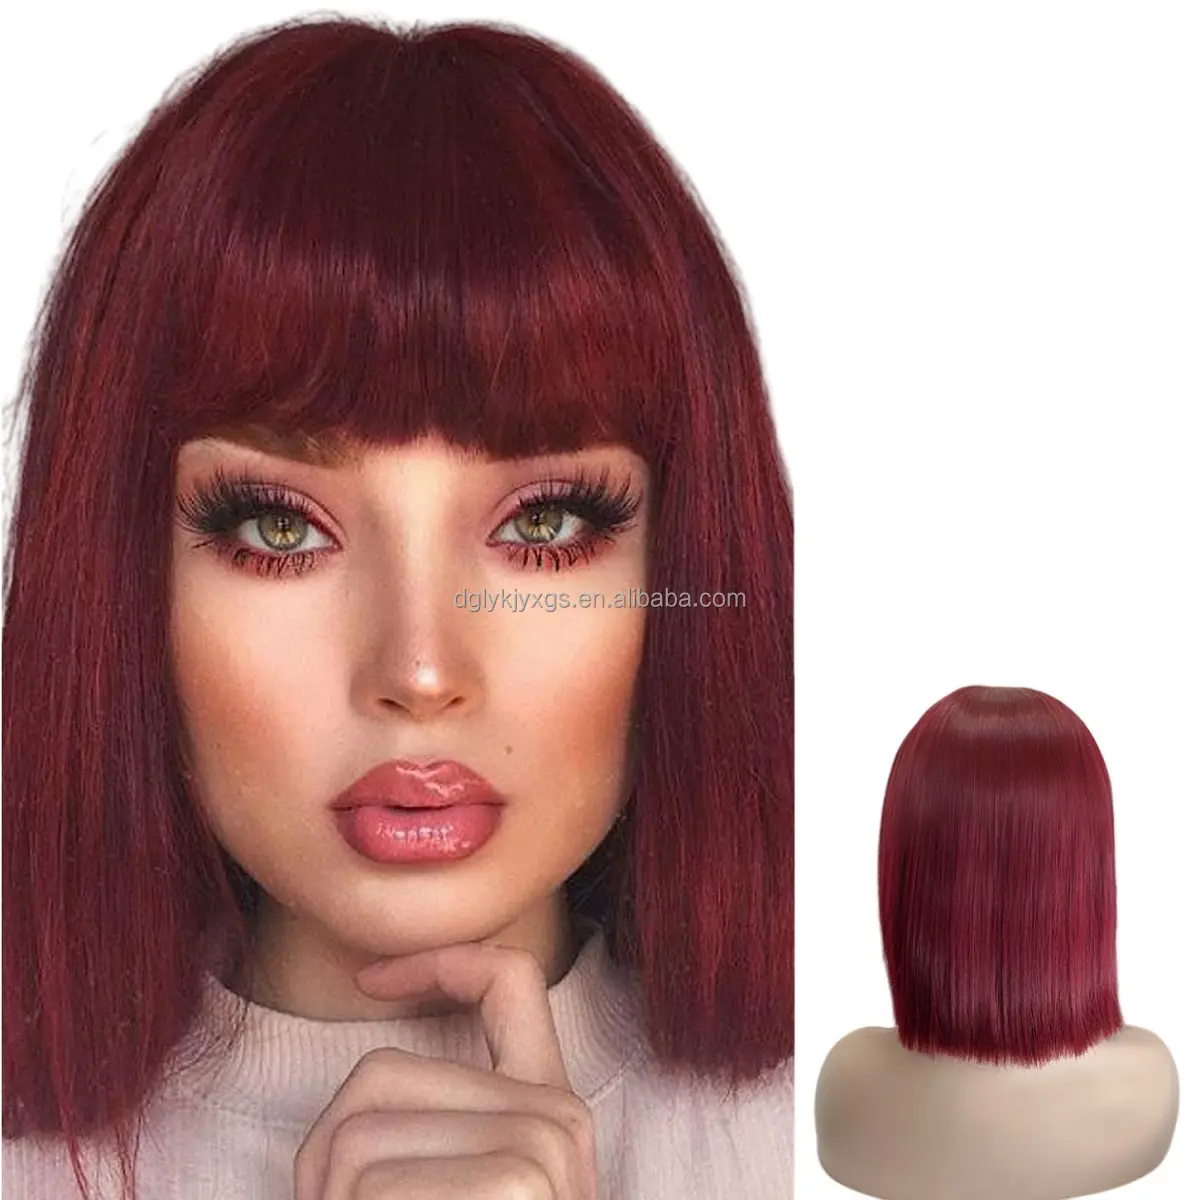 WH09 Wholesale Short Wig Cosplay Mid-long Bobo Peluca Heat Resistant Wigs Black Synthetic Anime Hair Cosplay for Party Women